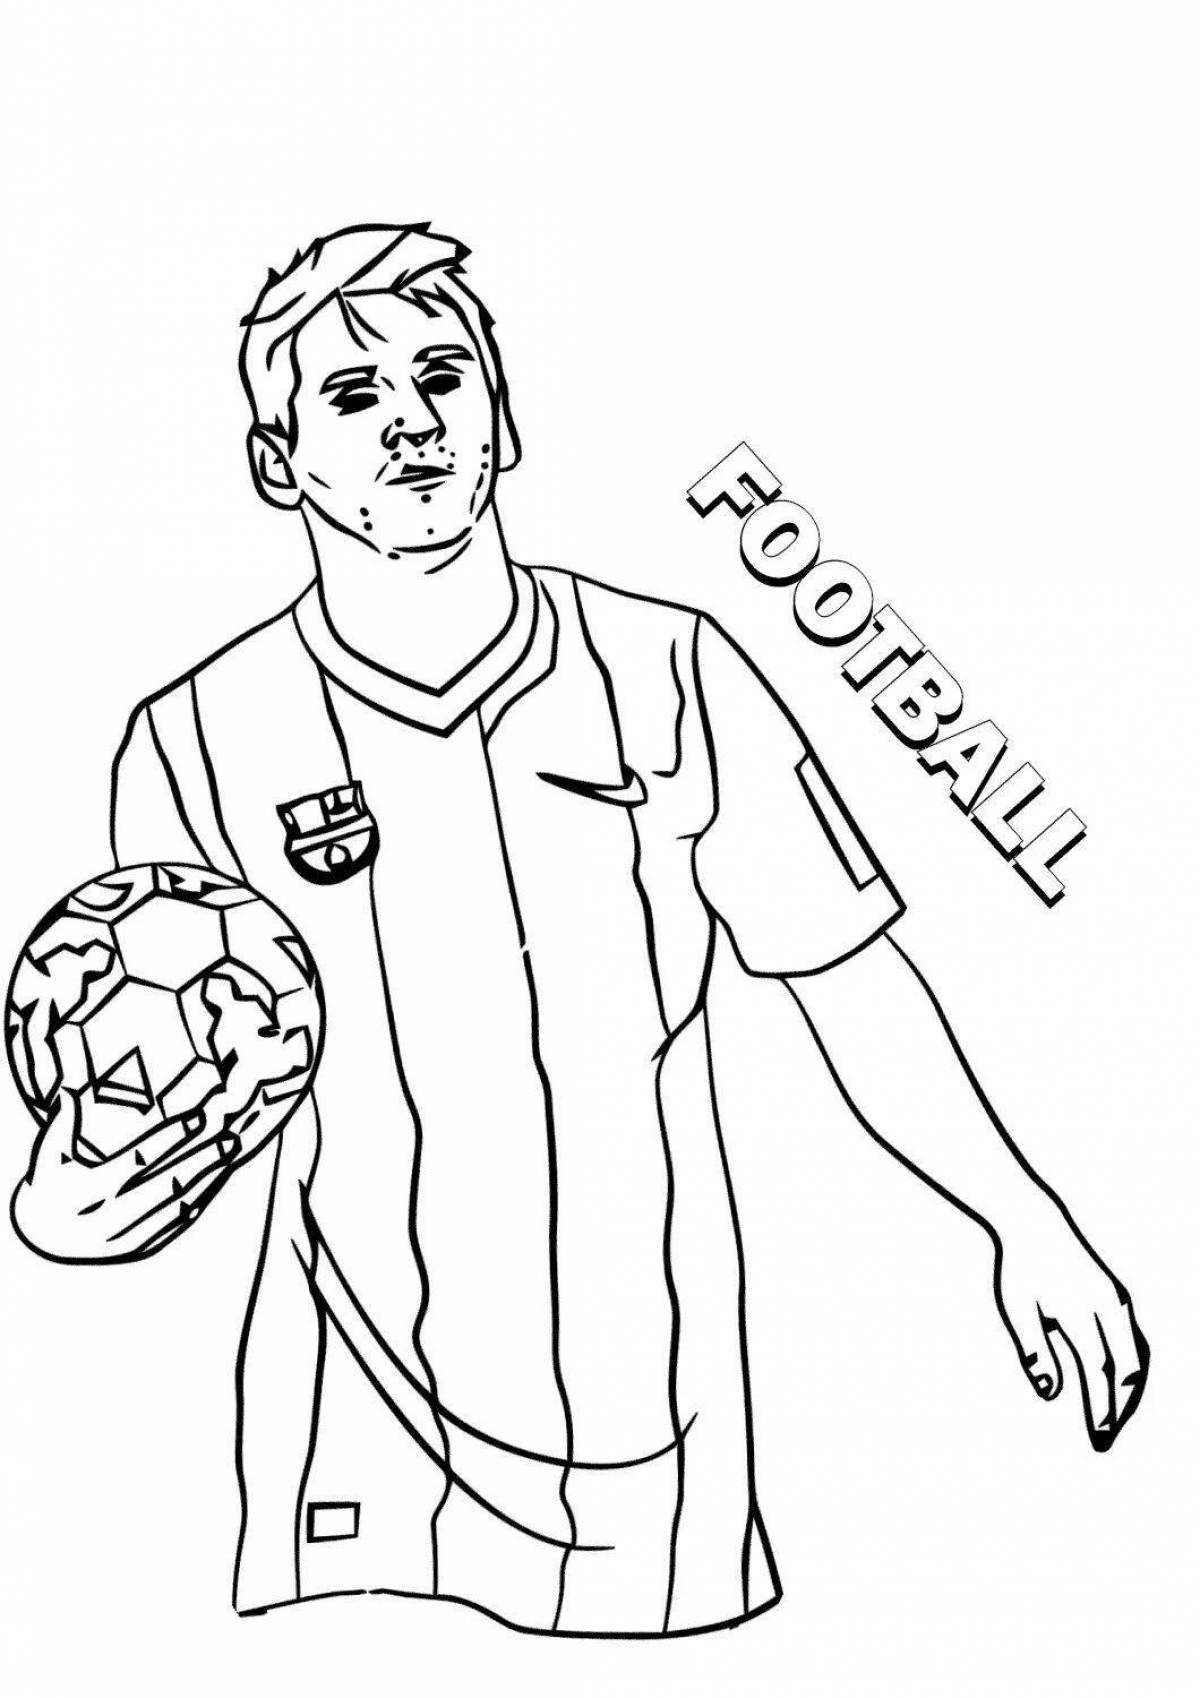 Leo messi's charming coloring book